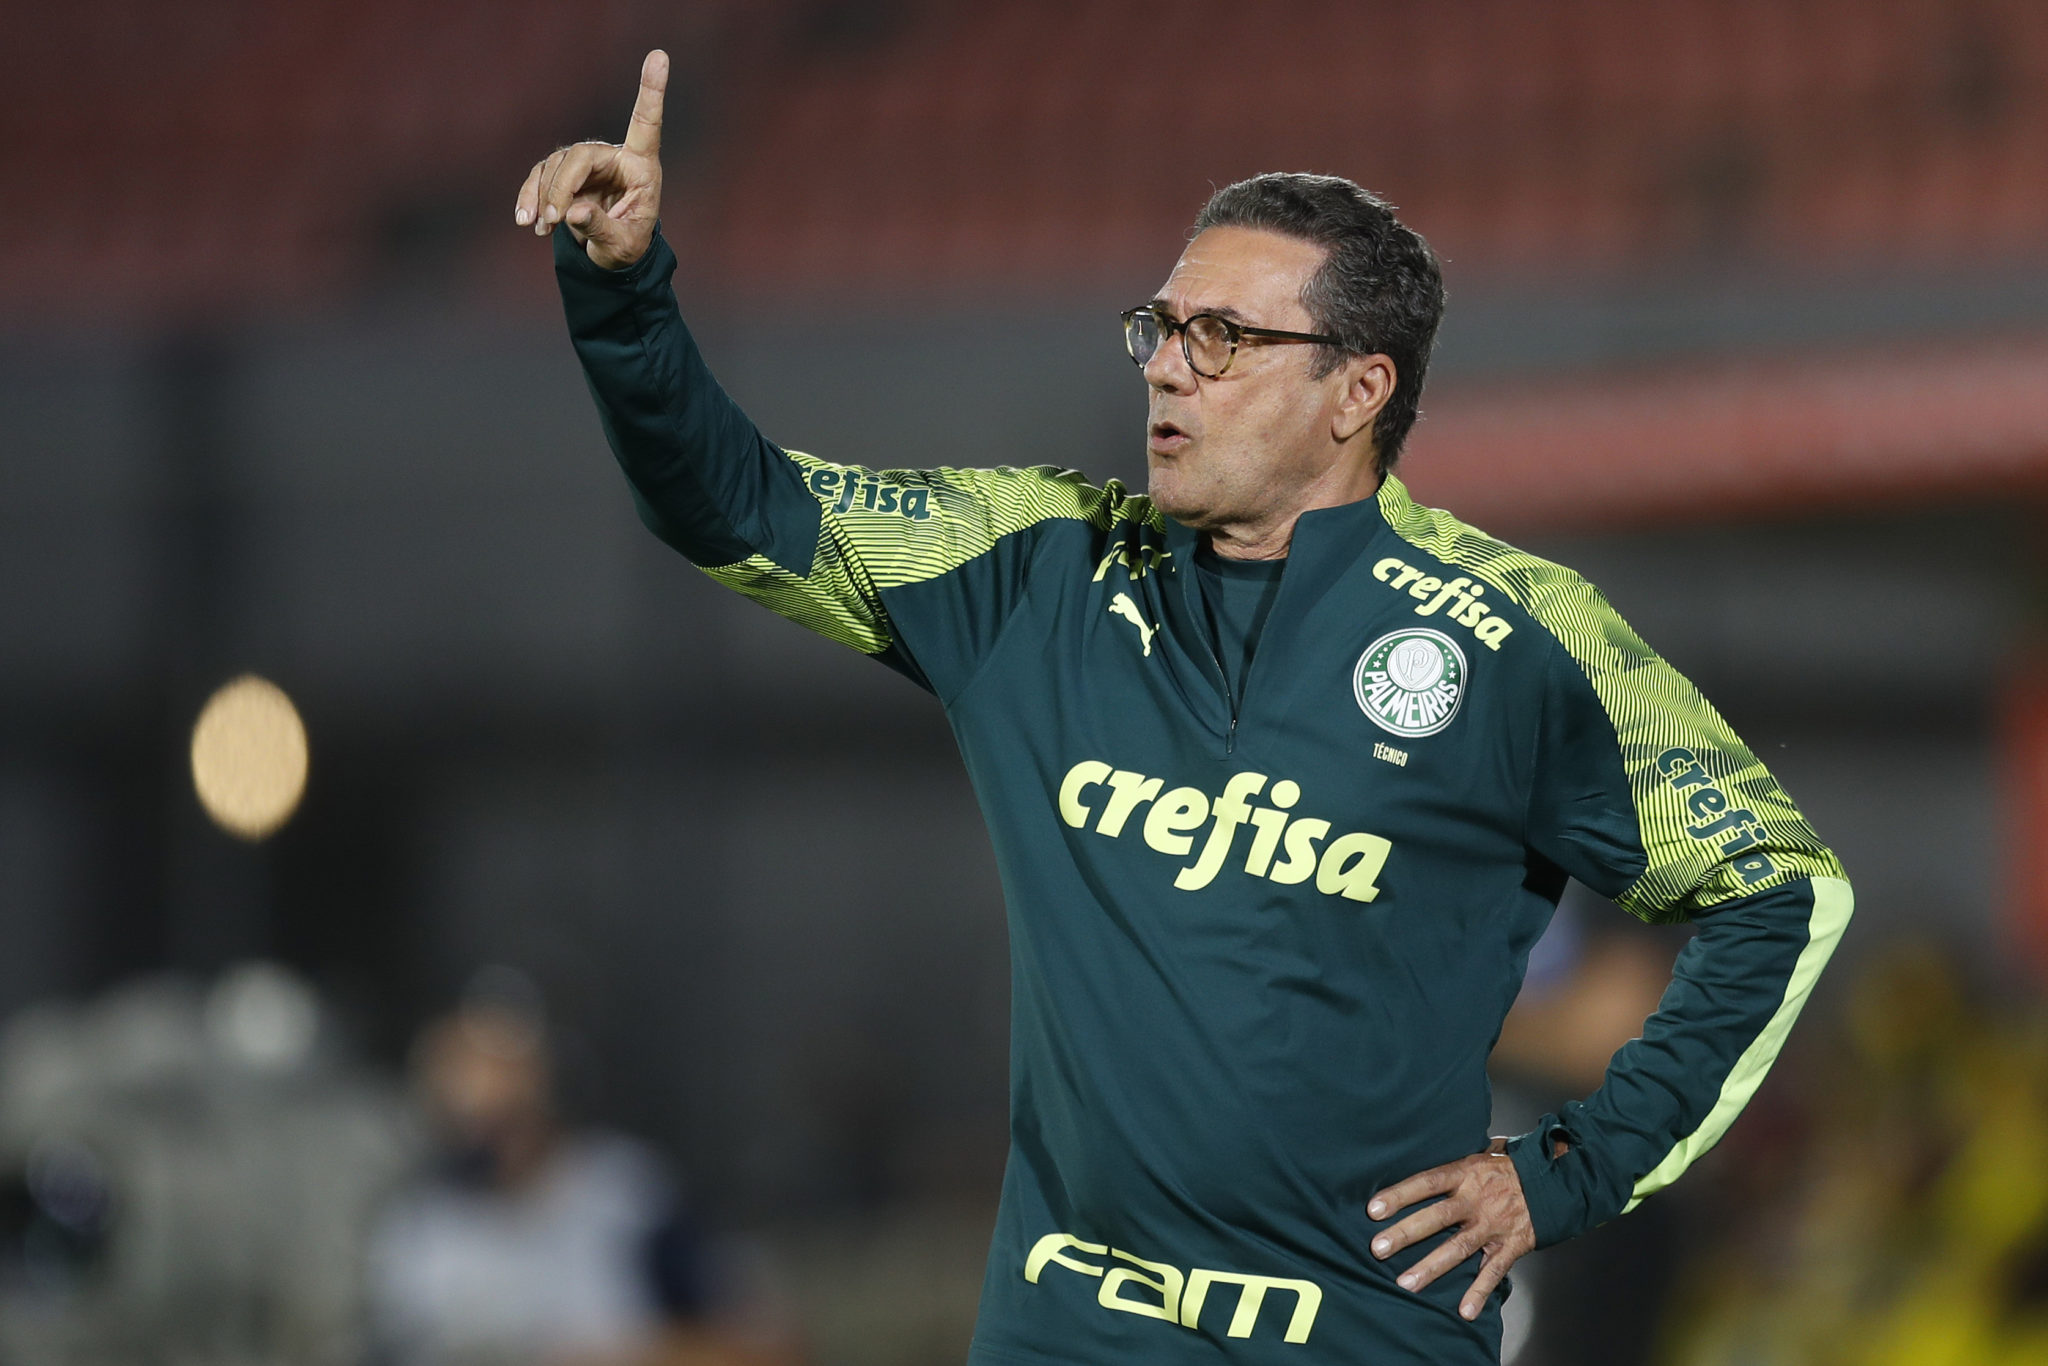 ASUNCION, PARAGUAY - SEPTEMBER 23: Vanderlei Luxemburgo head coach of Palmeiras gestures during a group B match of Copa CONMEBOL Libertadores between Guarani and Palmeiras at Defensores del Chaco Stadium on September 23, 2020 in Asuncion, Paraguay. (Photo by Jorge Saenz - Pool/Getty Images)